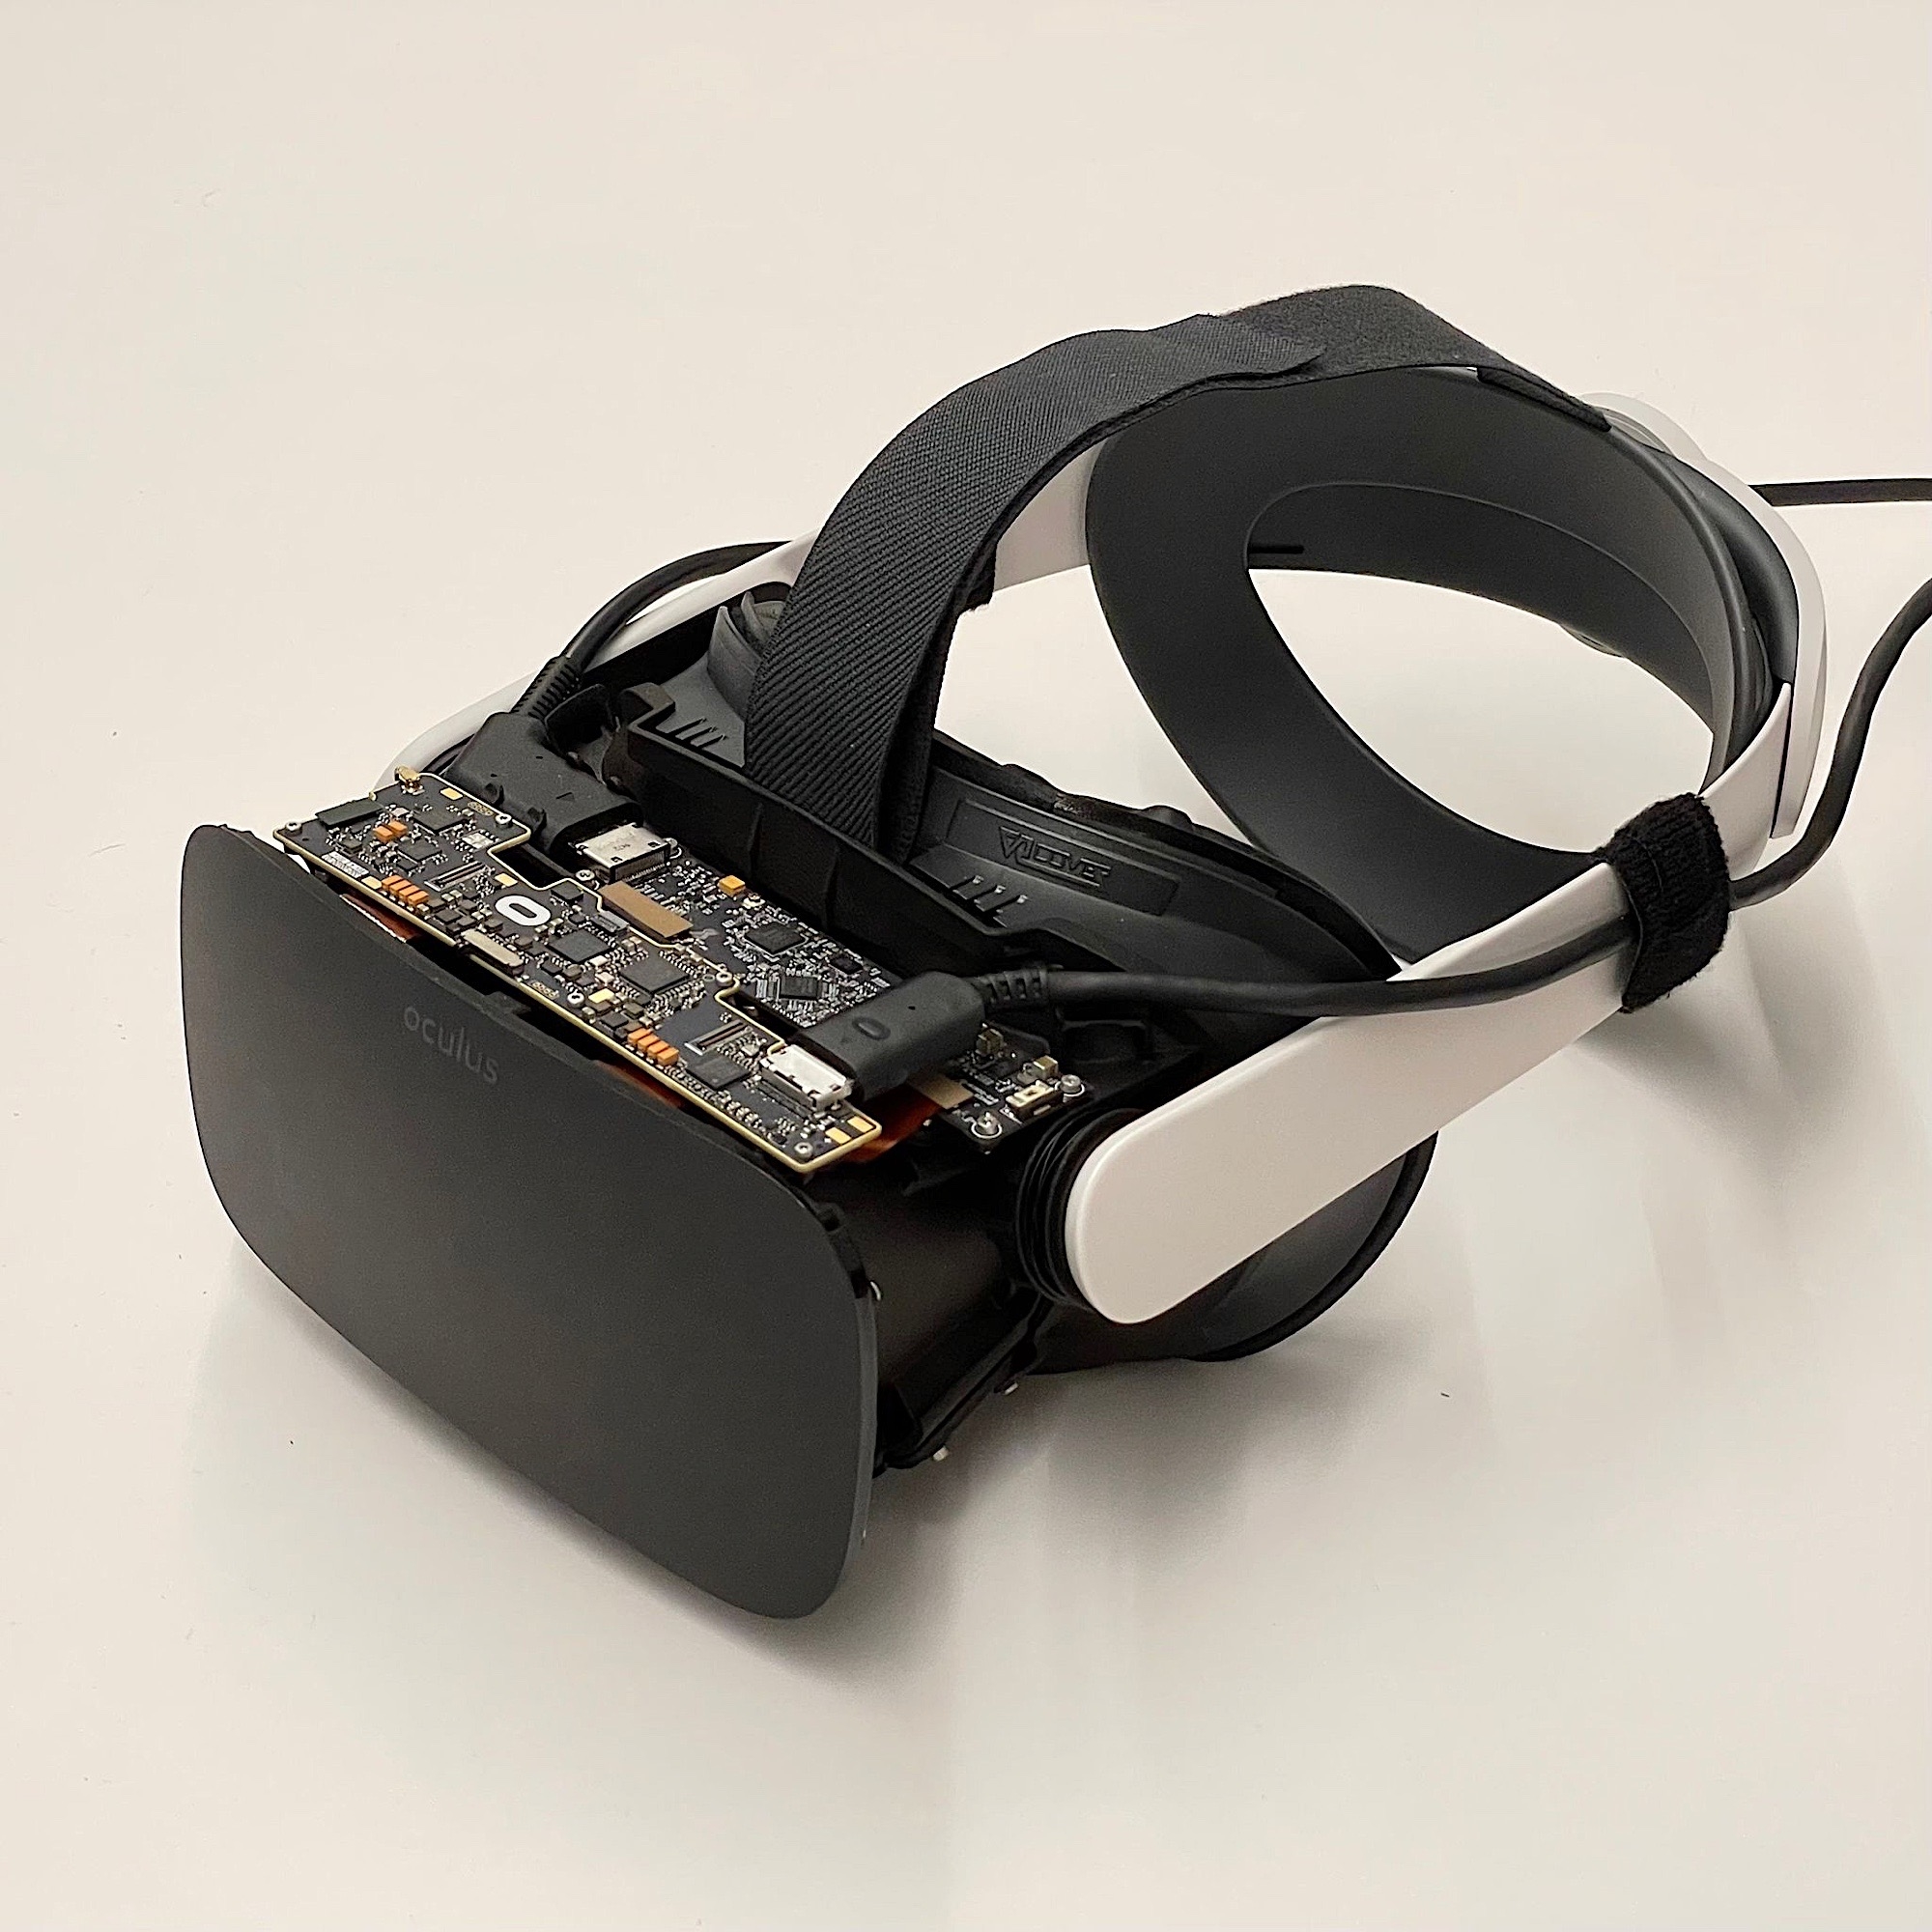 Meta's latest VR headset prototypes could help it pass the 'Visual Turing test' | DeviceDaily.com